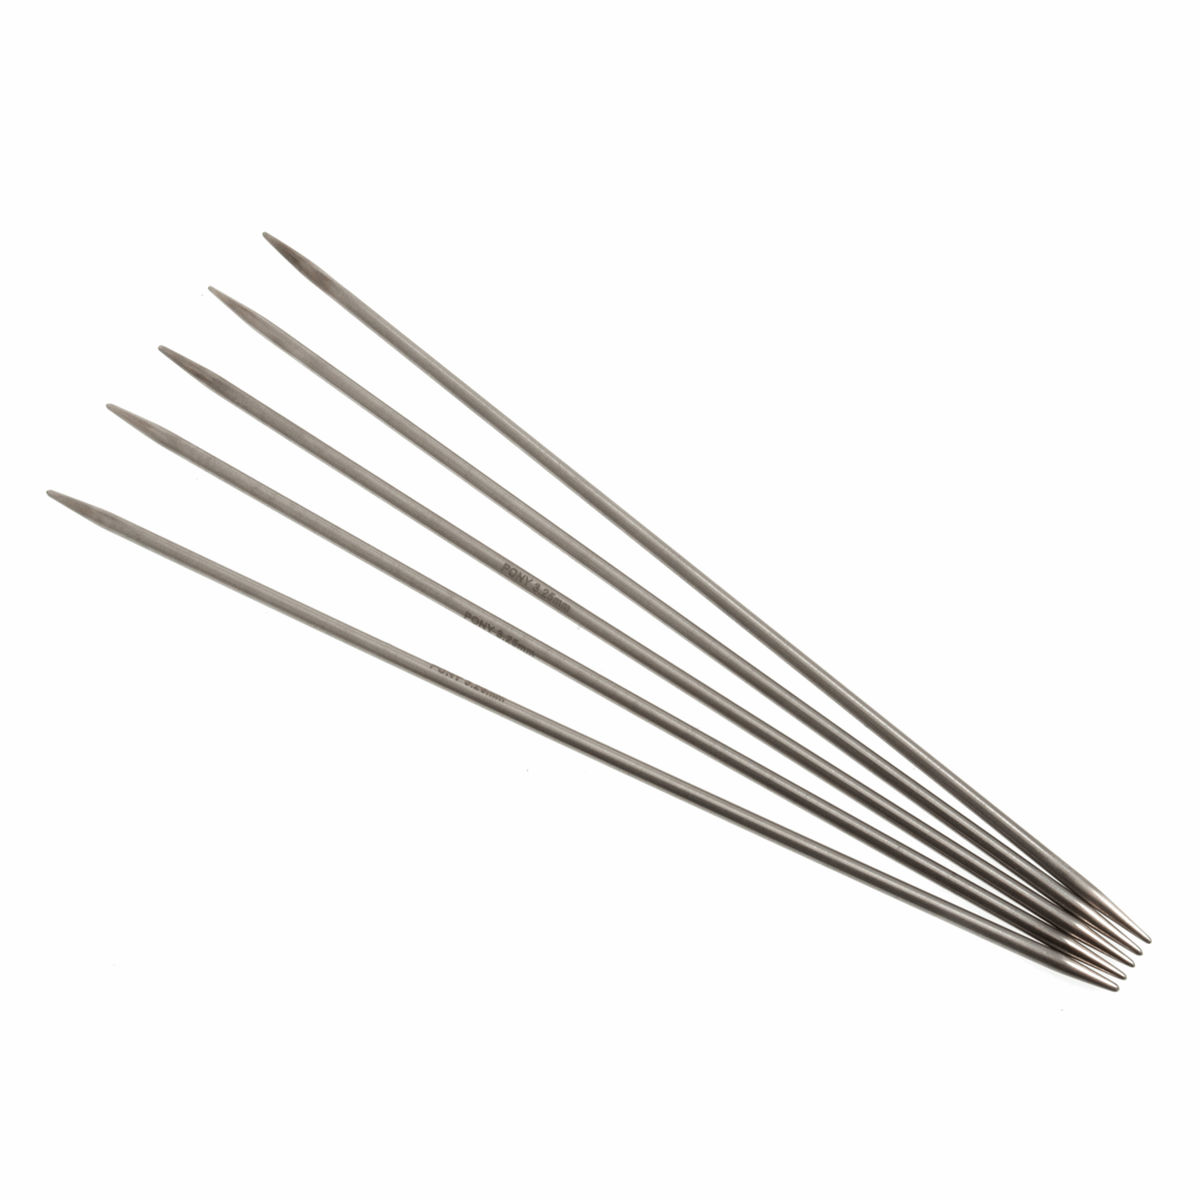 PONY 'Elan' Double-Ended Stainless Steel Knitting Pins - 20cm x 3.25mm (Set of 5)